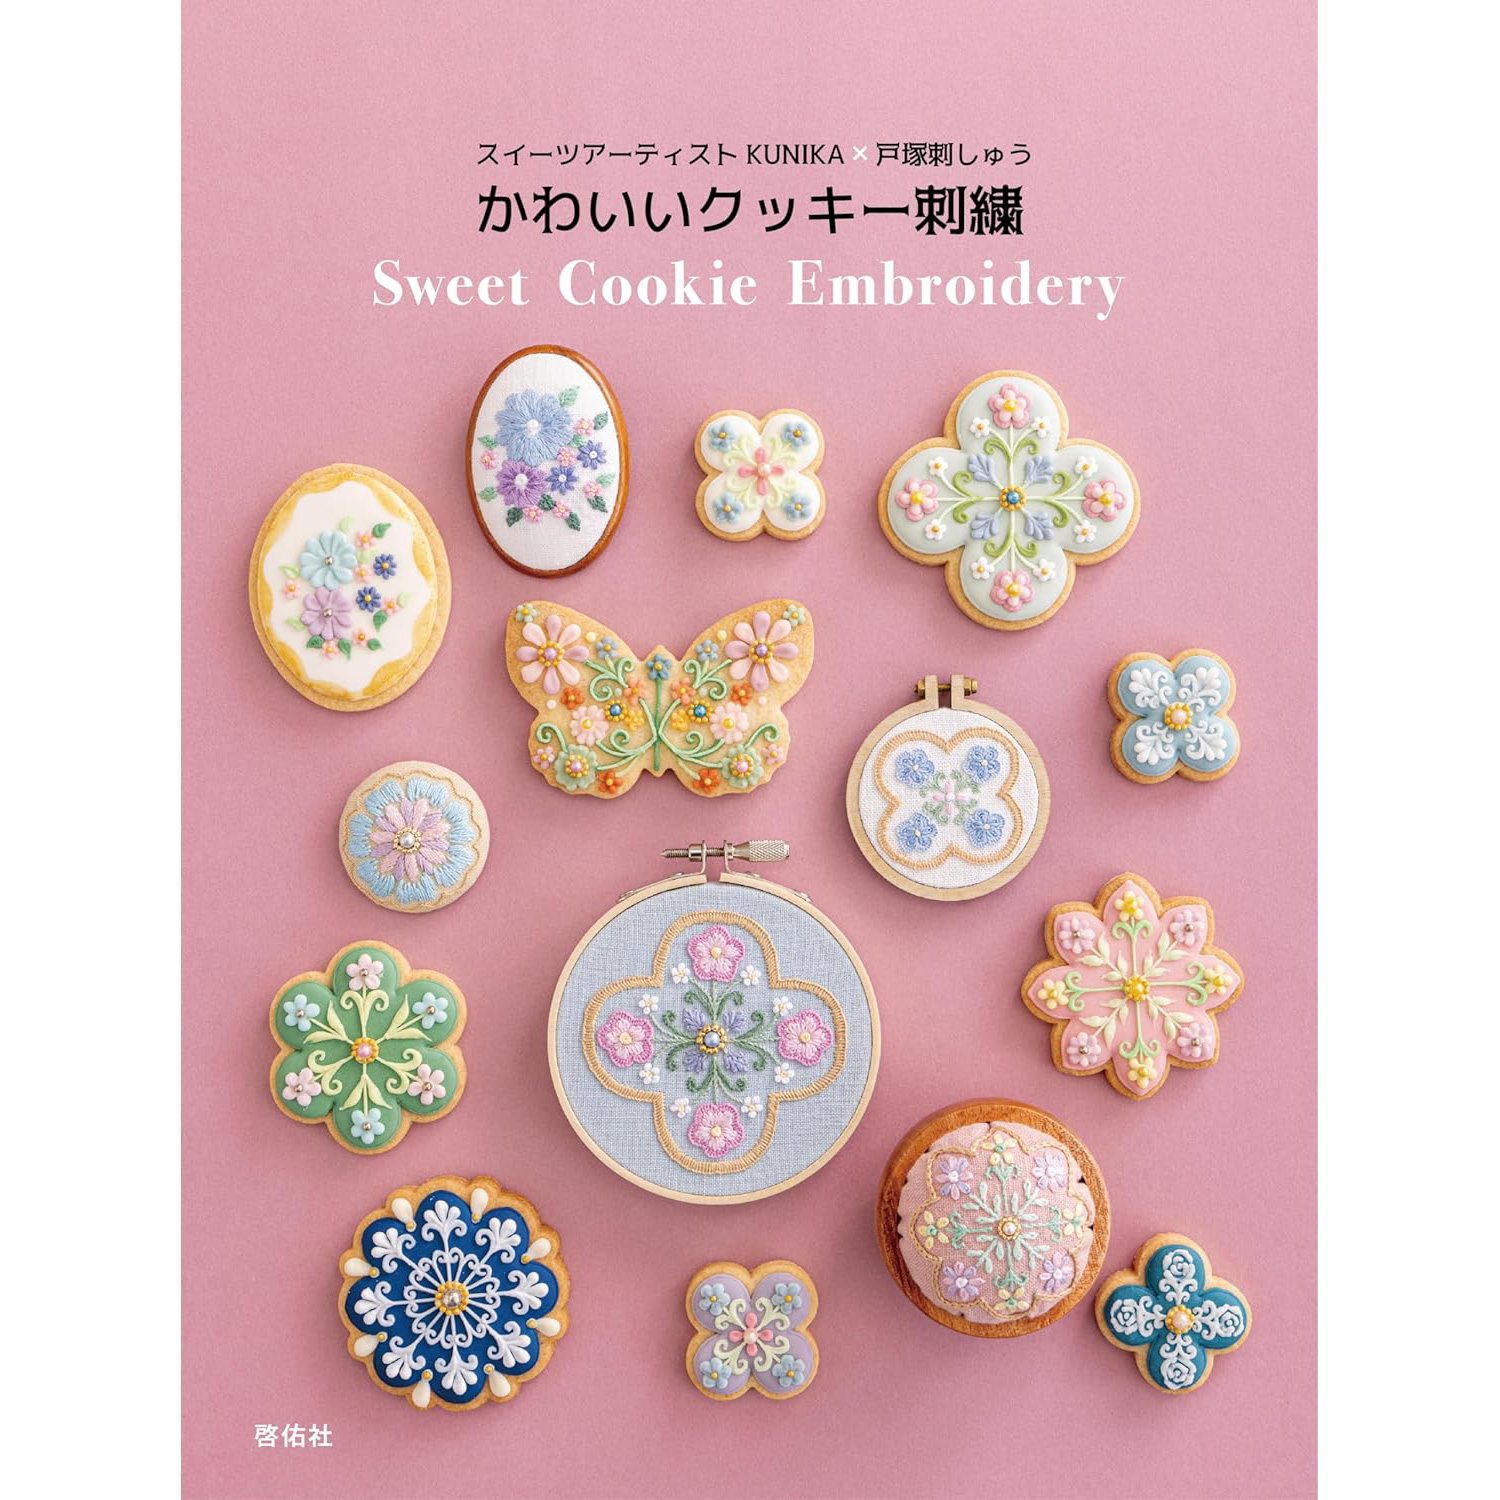 KYS20672 Sweets Artist KUNIKA x Totsuka Embroidery Cute Cookie Embroidery (Book)